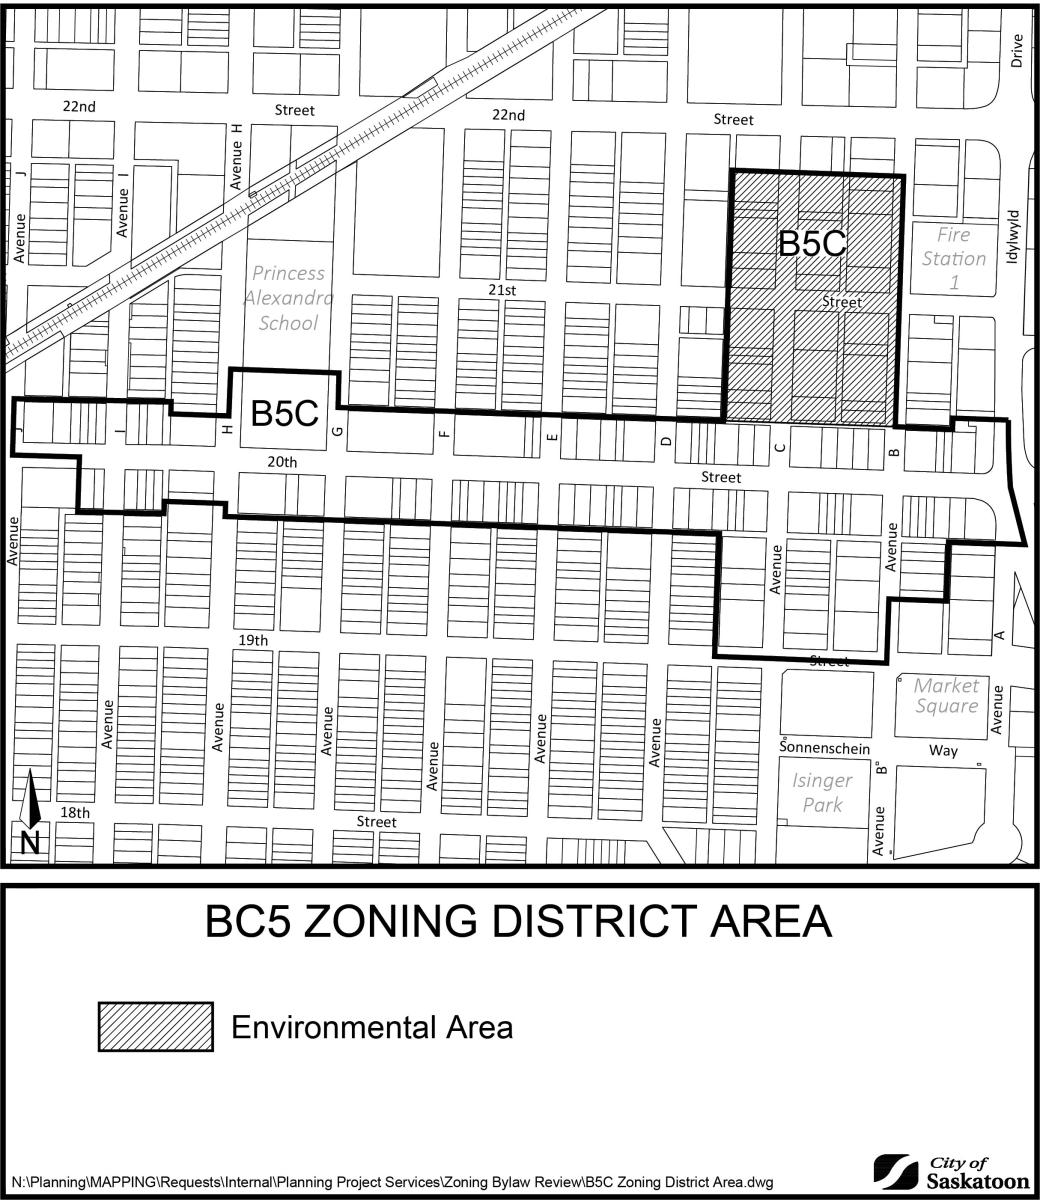 B5C Zoning District Area and Proposed Area